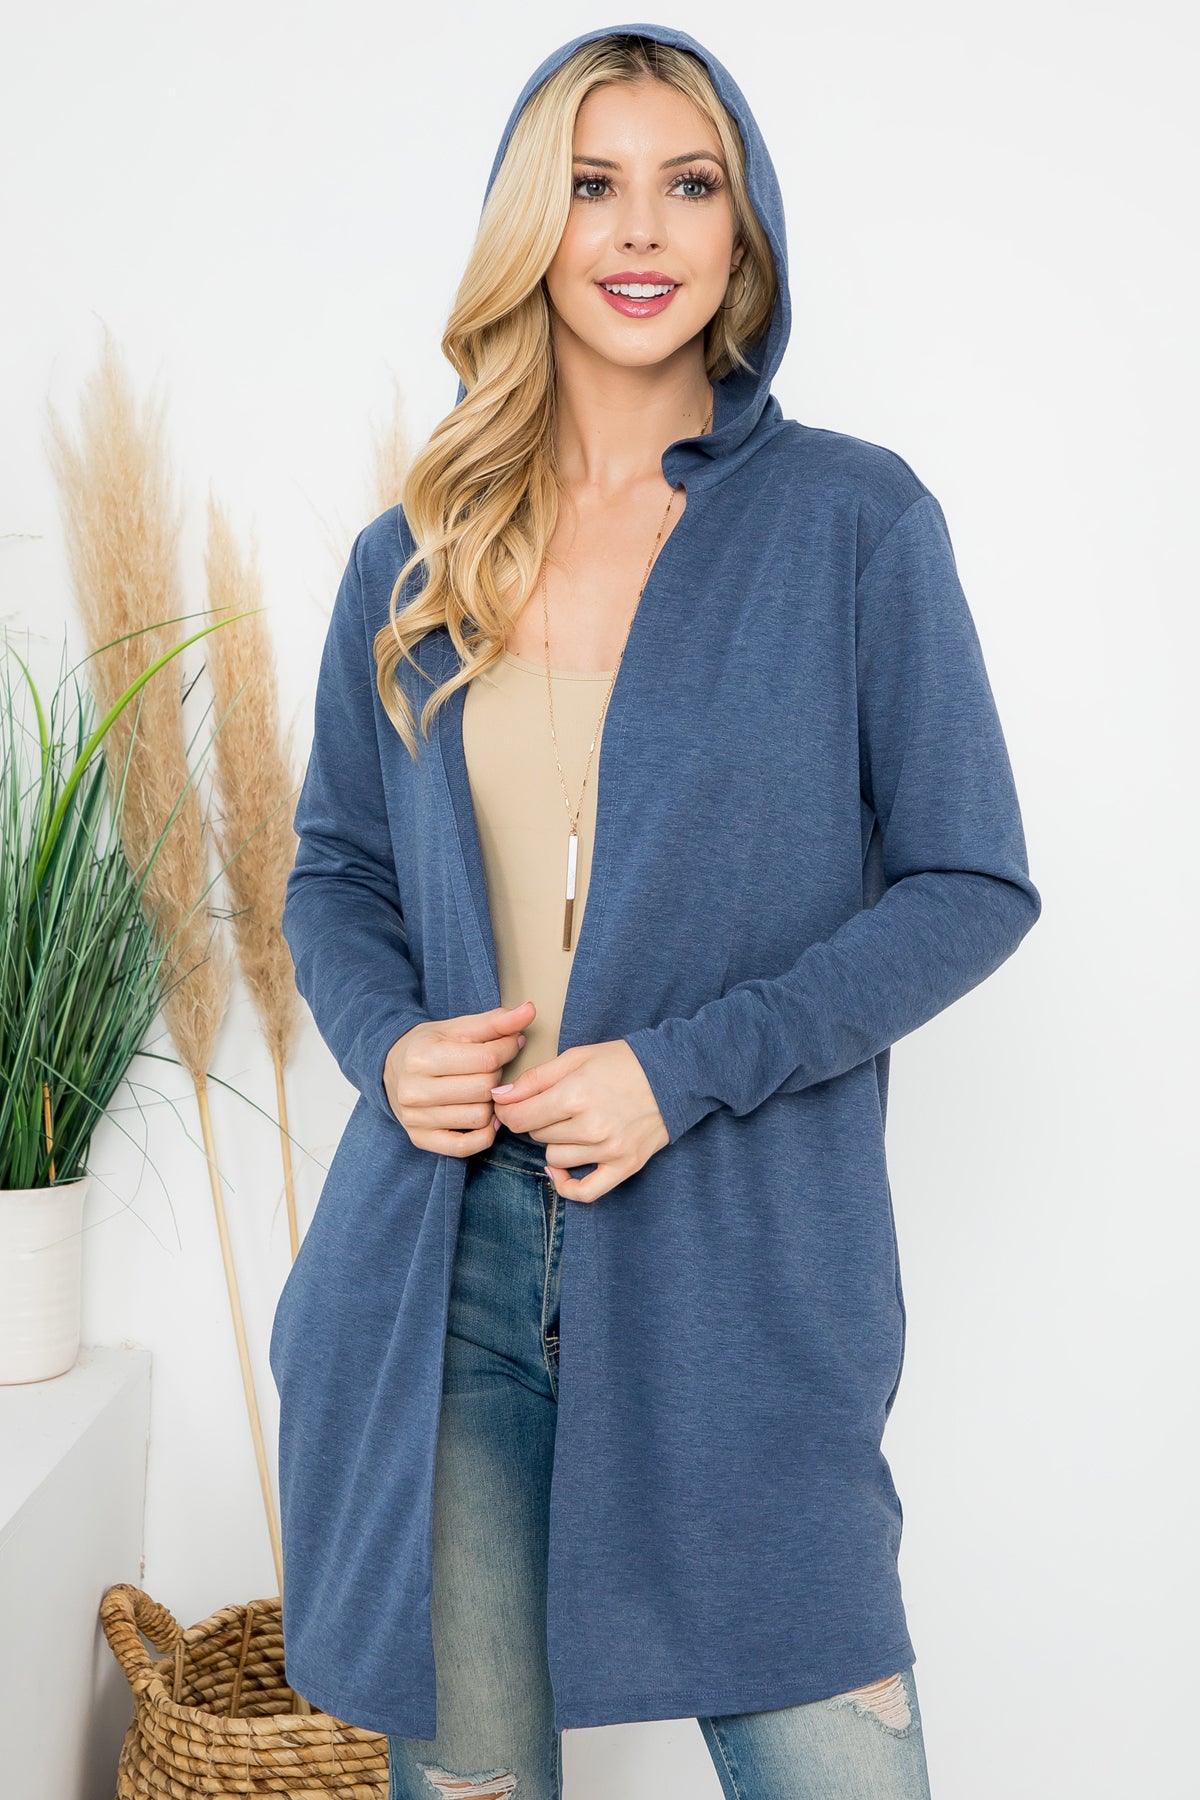 LONG SLEEVE OPEN FRONT FRENCH TERRY HOODIE CARDIGAN 1-1-1-1